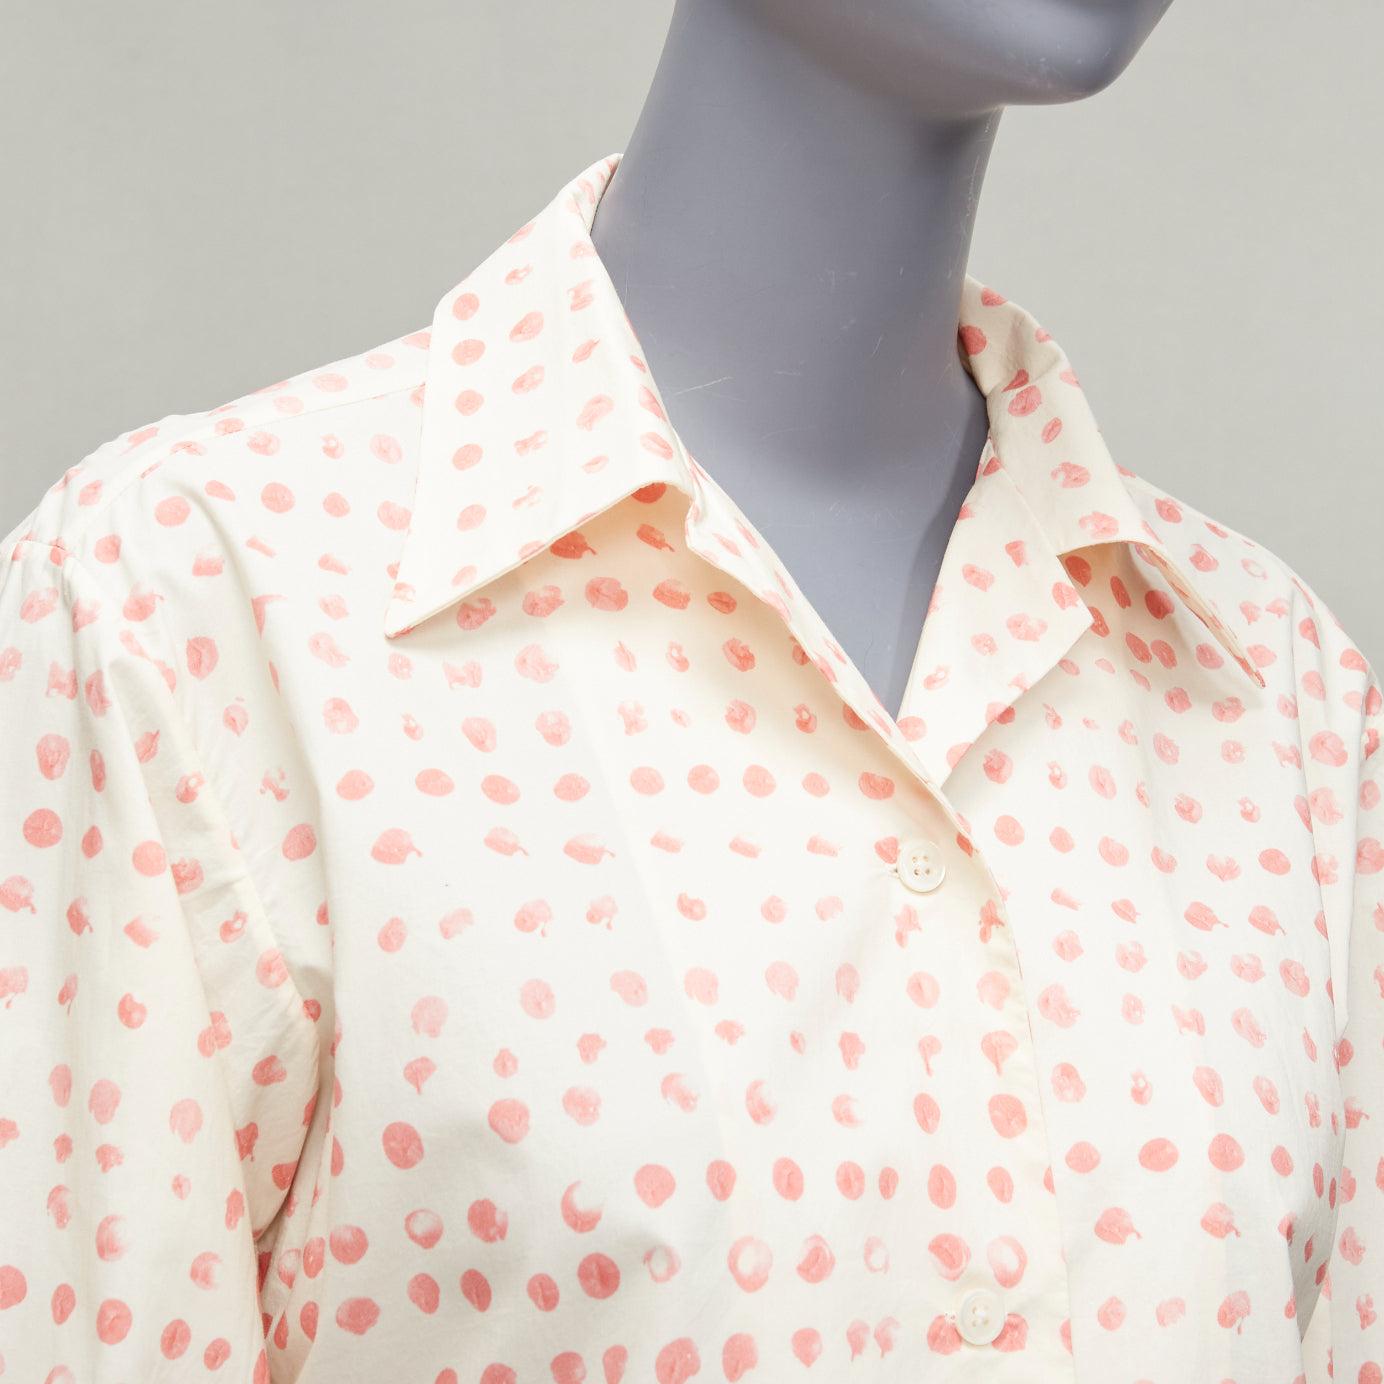 MARNI cream pink painted polka dots print long sleeve shirt IT38 XS
Reference: CELG/A00353
Brand: Marni
Material: Cotton
Color: Cream, Pink
Pattern: Polka Dot
Closure: Button
Extra Details: Back yoke.
Made in: Italy

CONDITION:
Condition: Excellent,